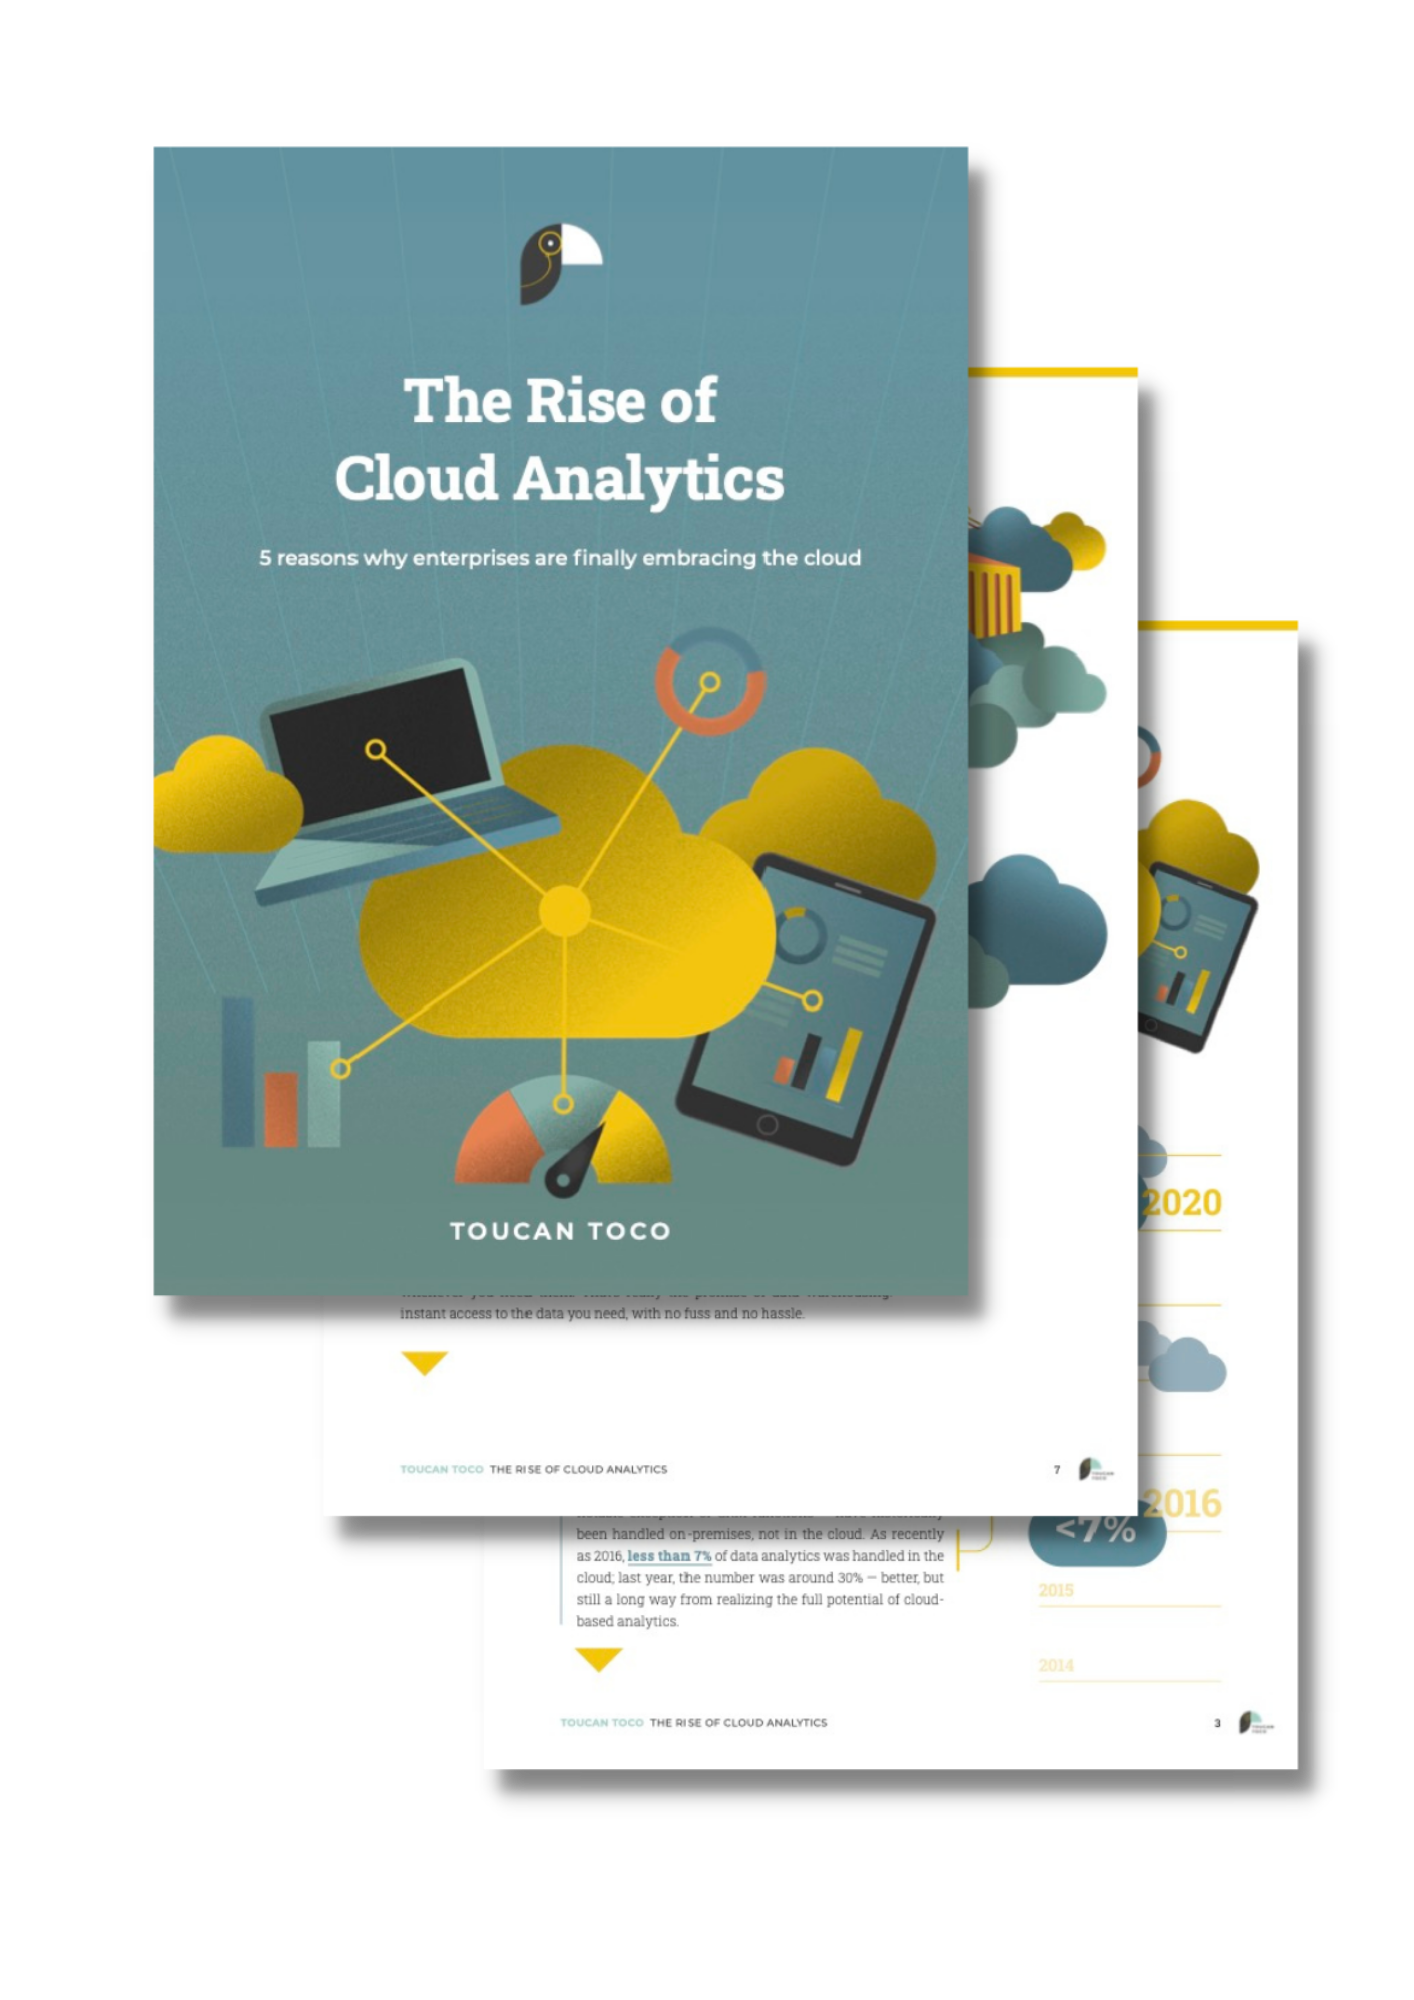 The rise of cloud analytics